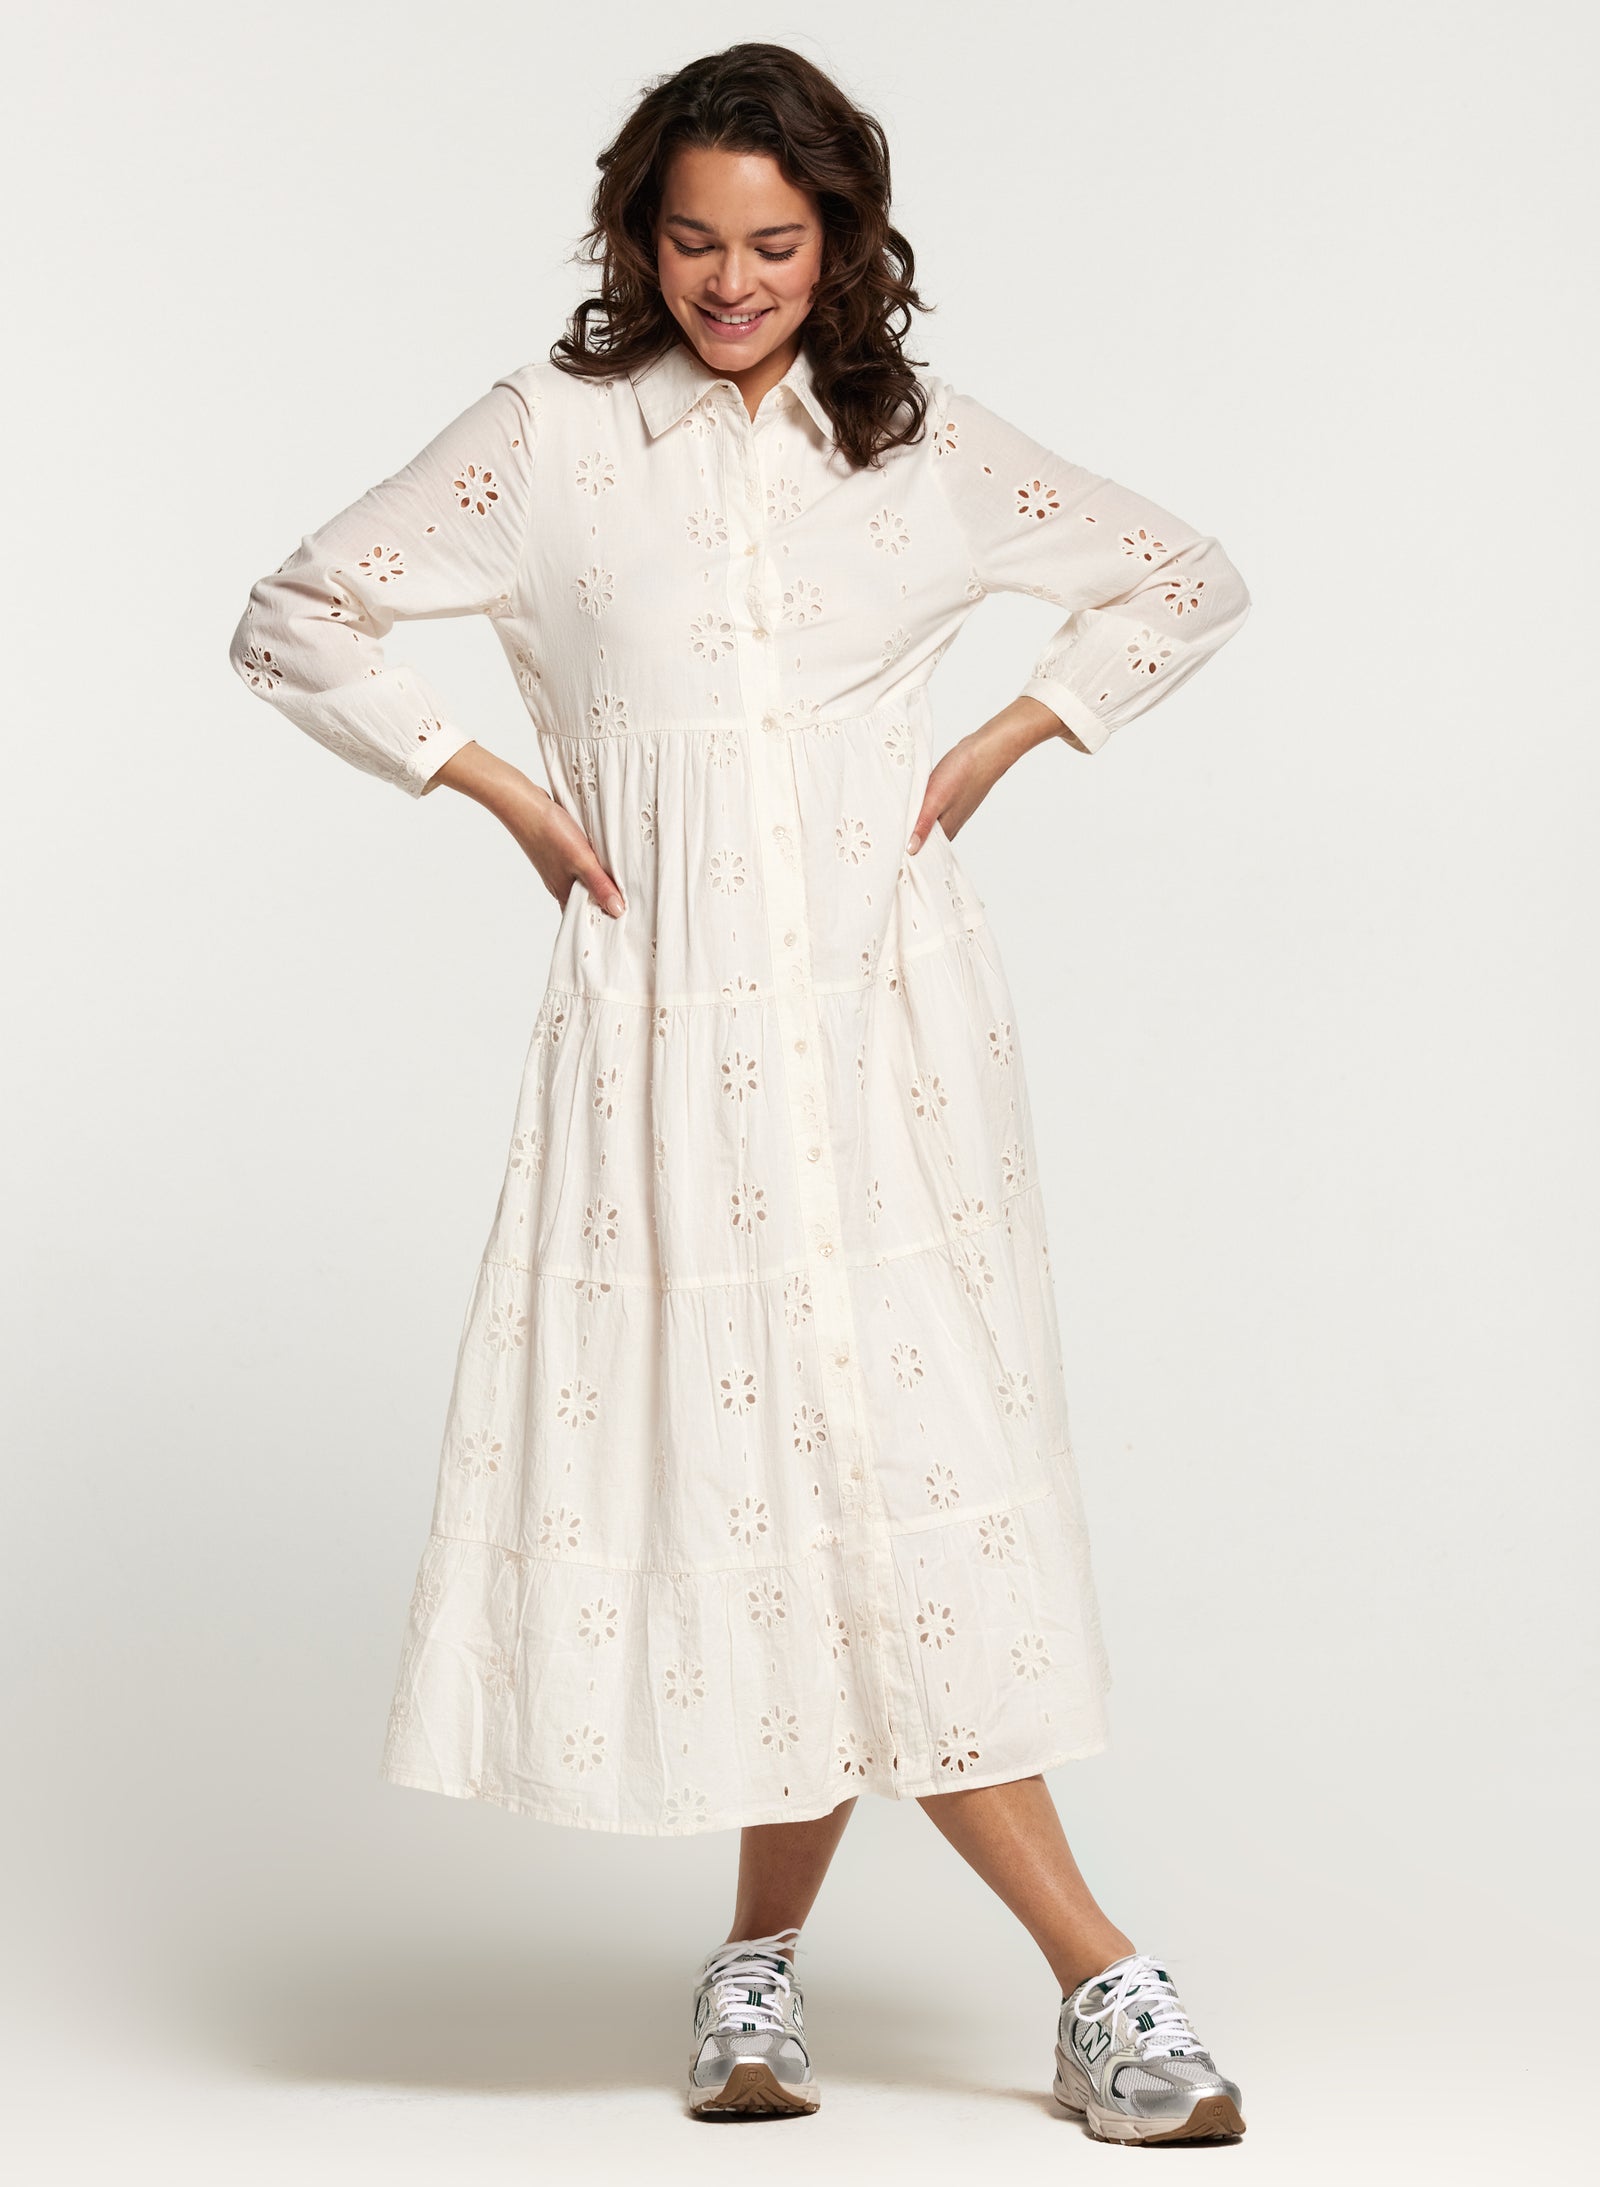 Ladies FIRENZE dress BRODERIE ANGLAISE